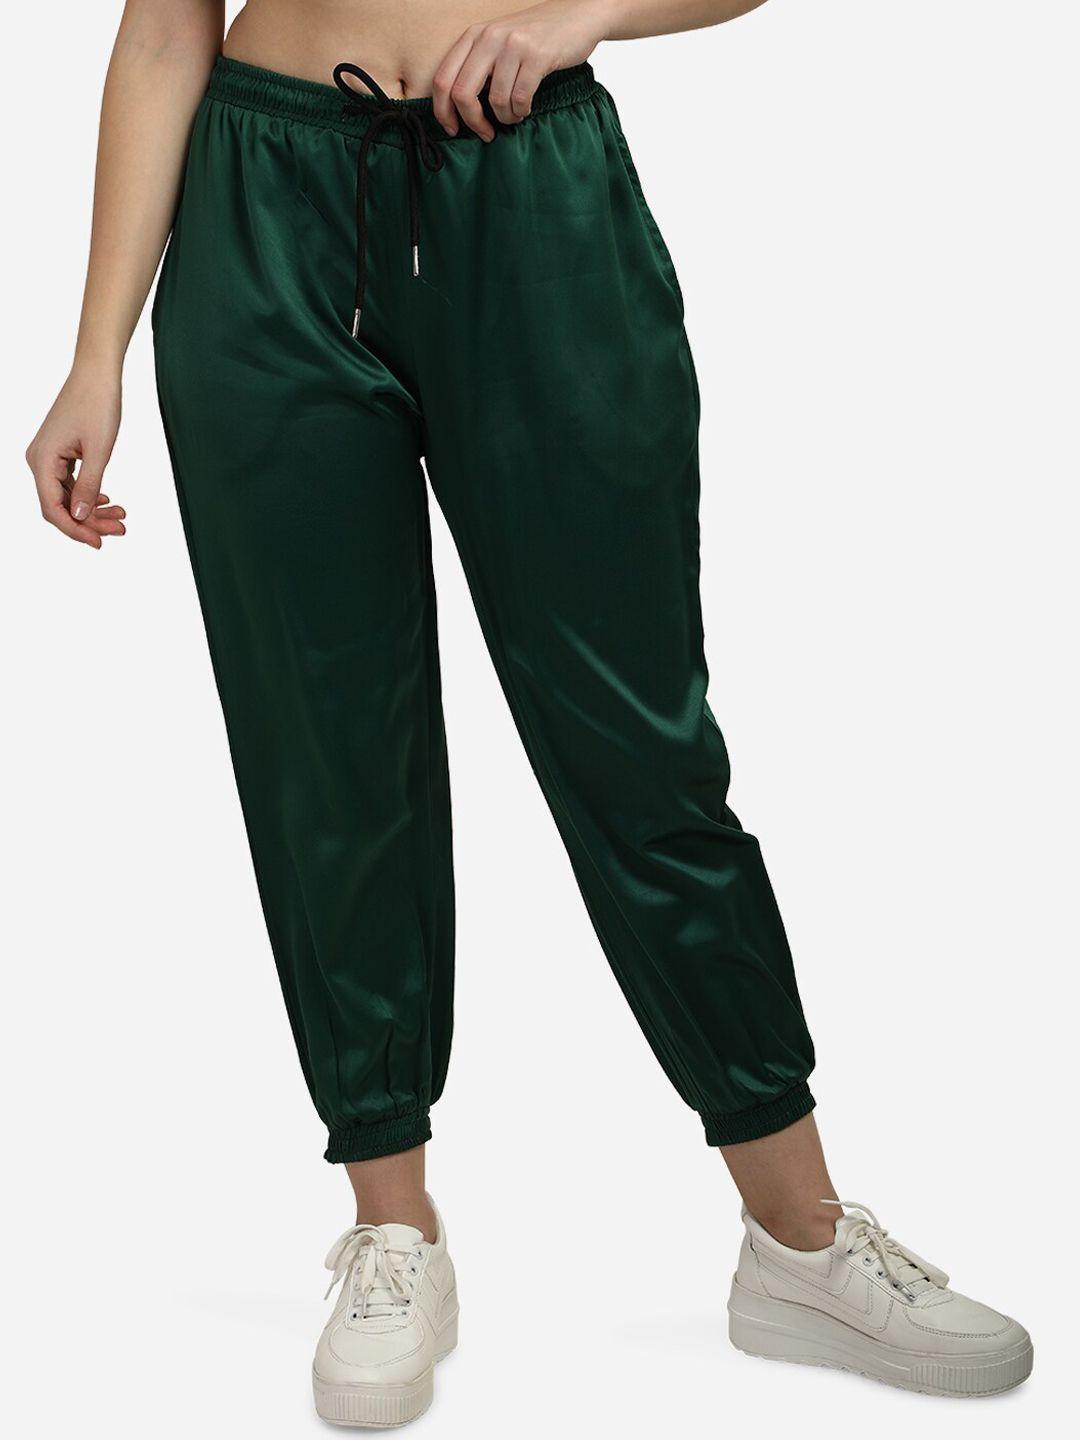 smarty-pants-women-green-solid-regular-fit-travel-joggers